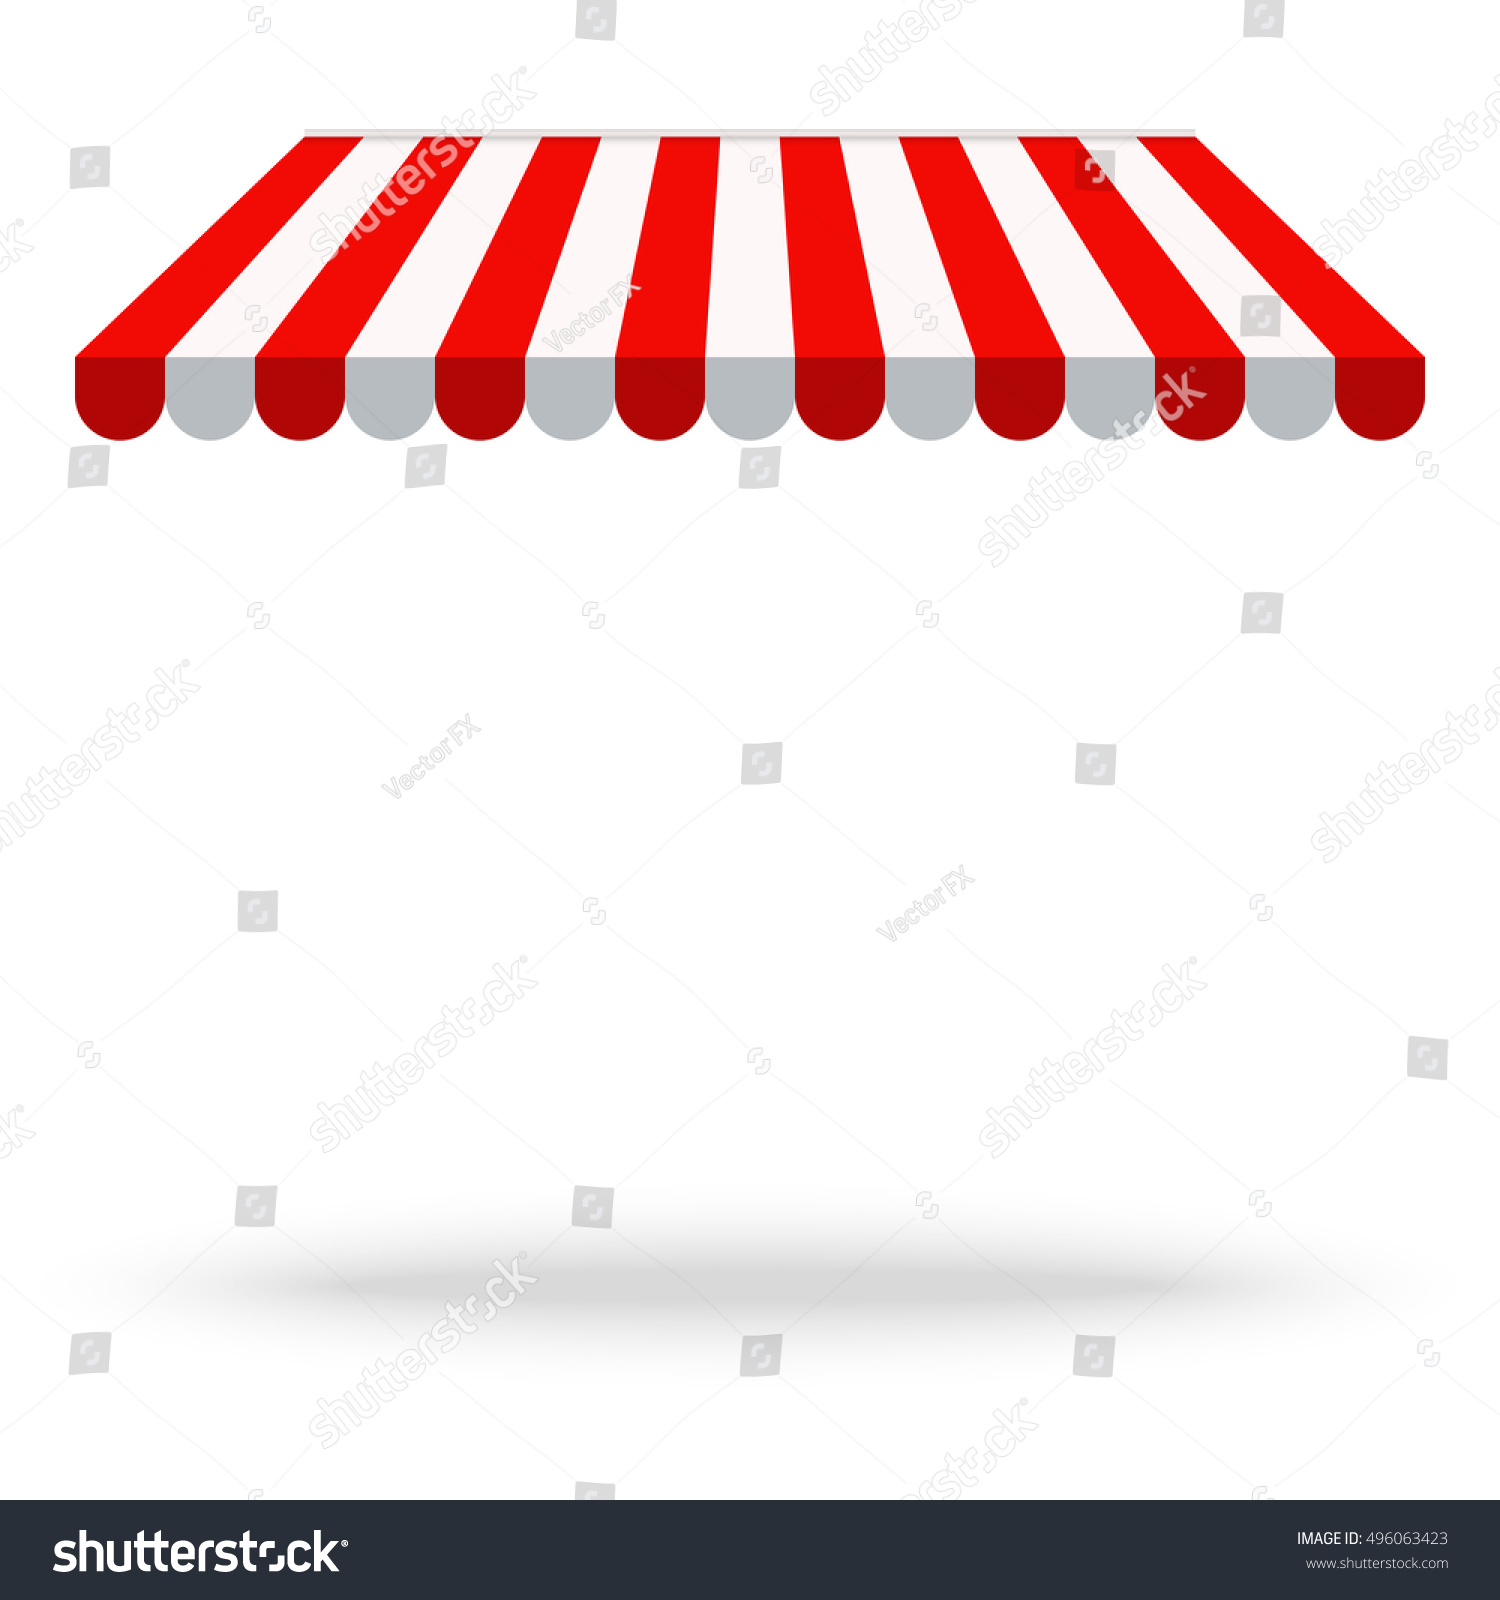 SVG of Awning canopy for shops, cafes and street restaurants.  Striped red and white sunshade. Vector illustration. Outside canopy from the sun.  svg